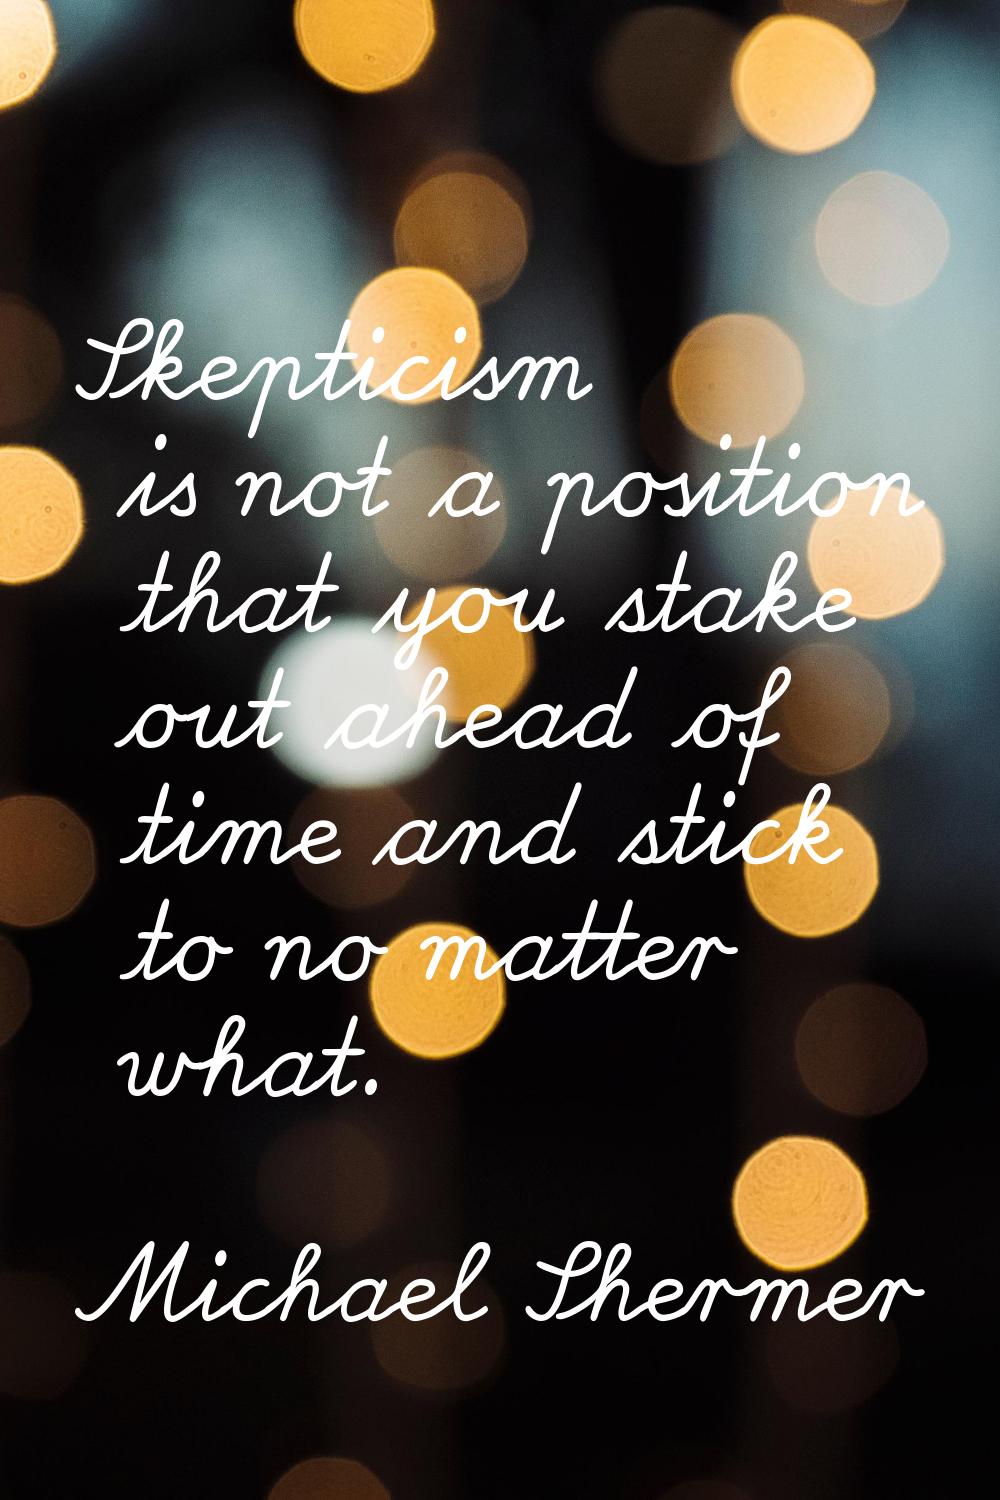 Skepticism is not a position that you stake out ahead of time and stick to no matter what.